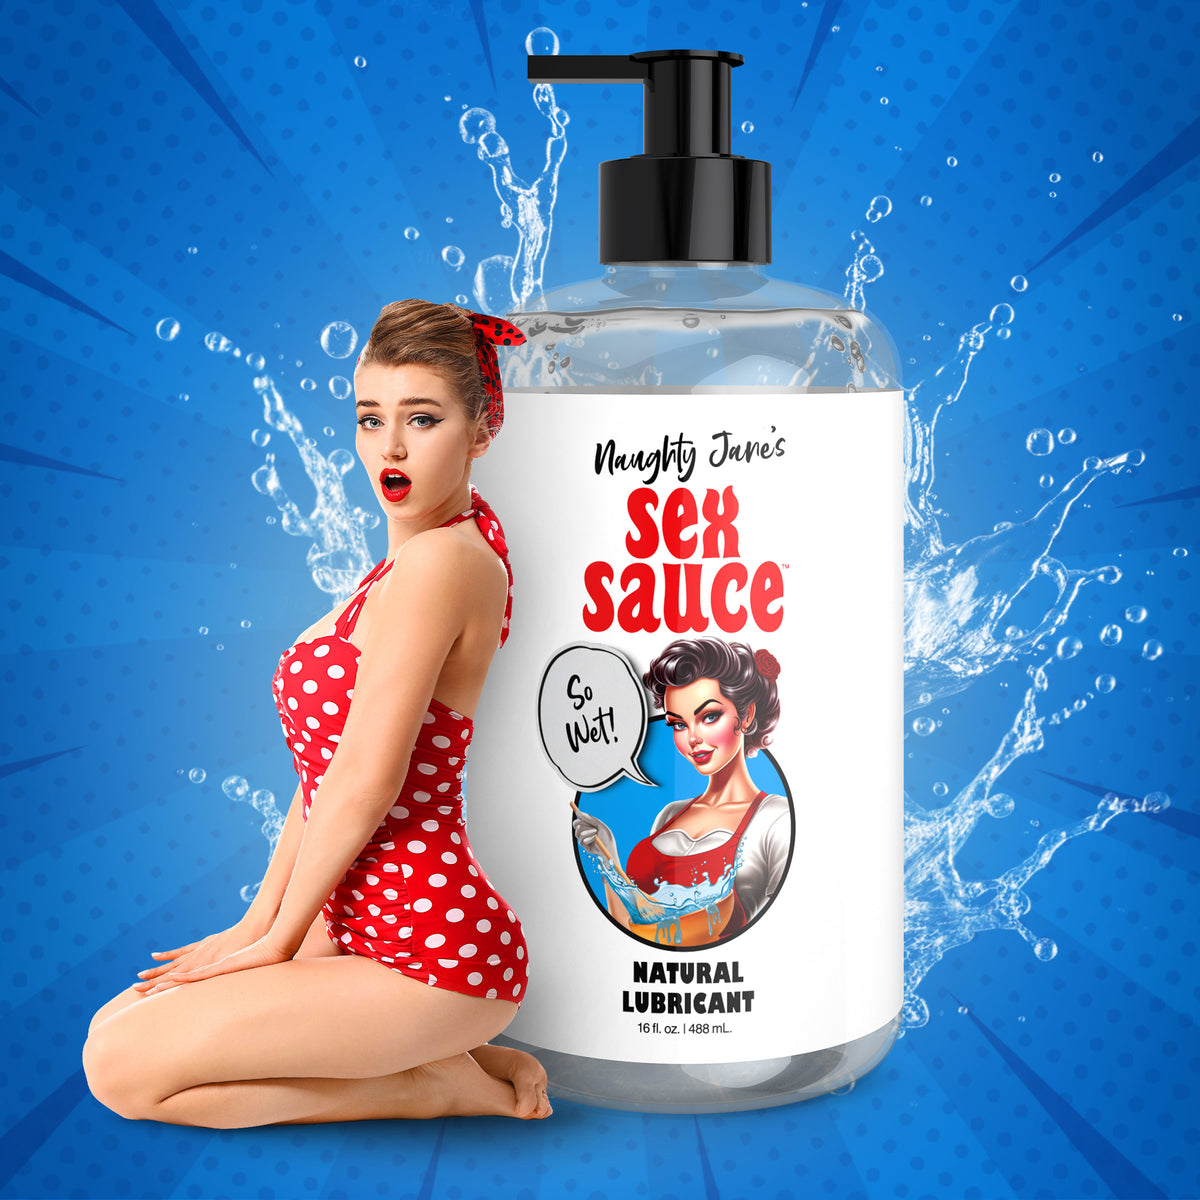 Naughty Jane's Sex Sauce Natural Lubricant 16oz